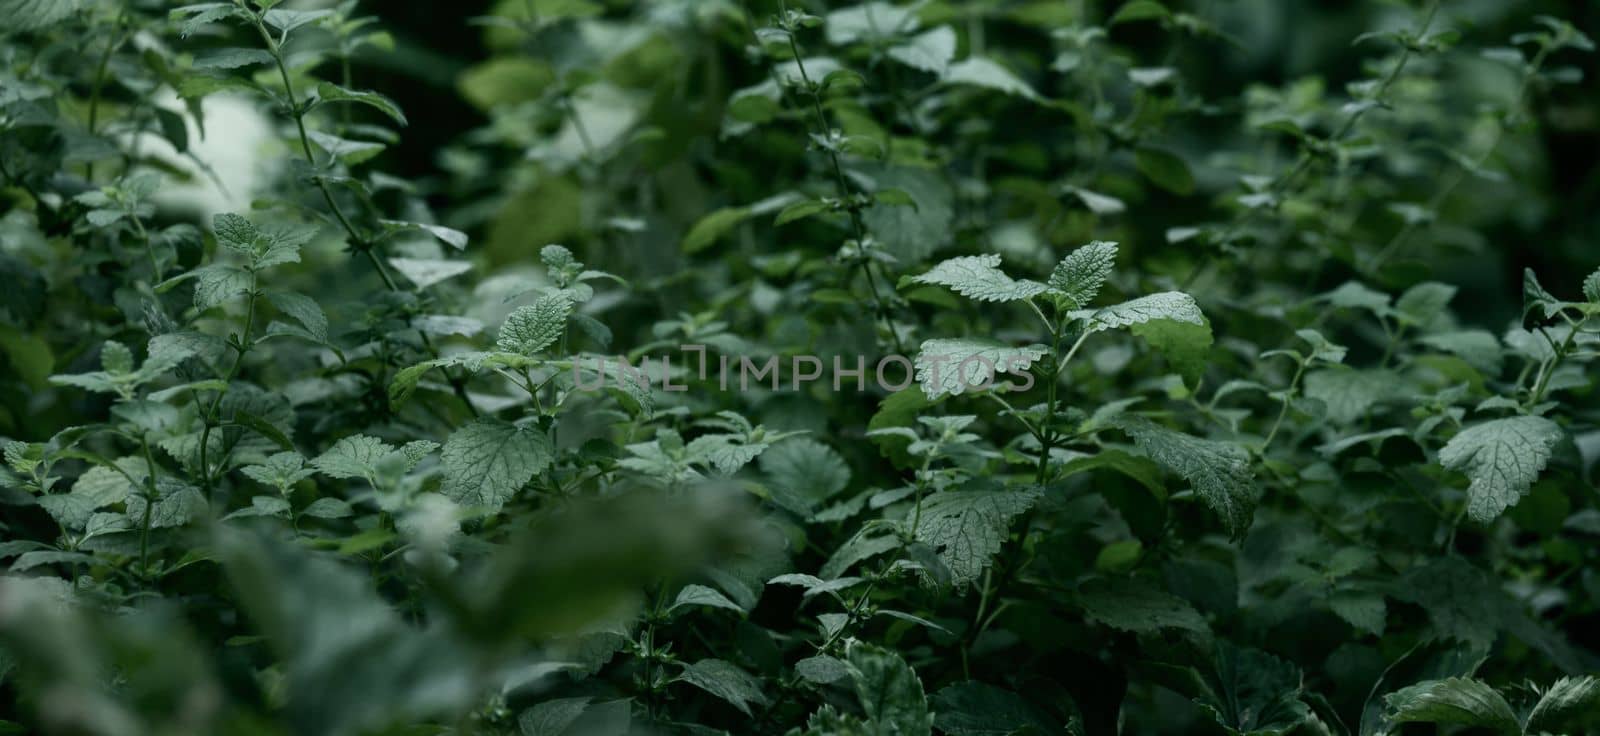 Growing mint bushes in the garden on a summer day